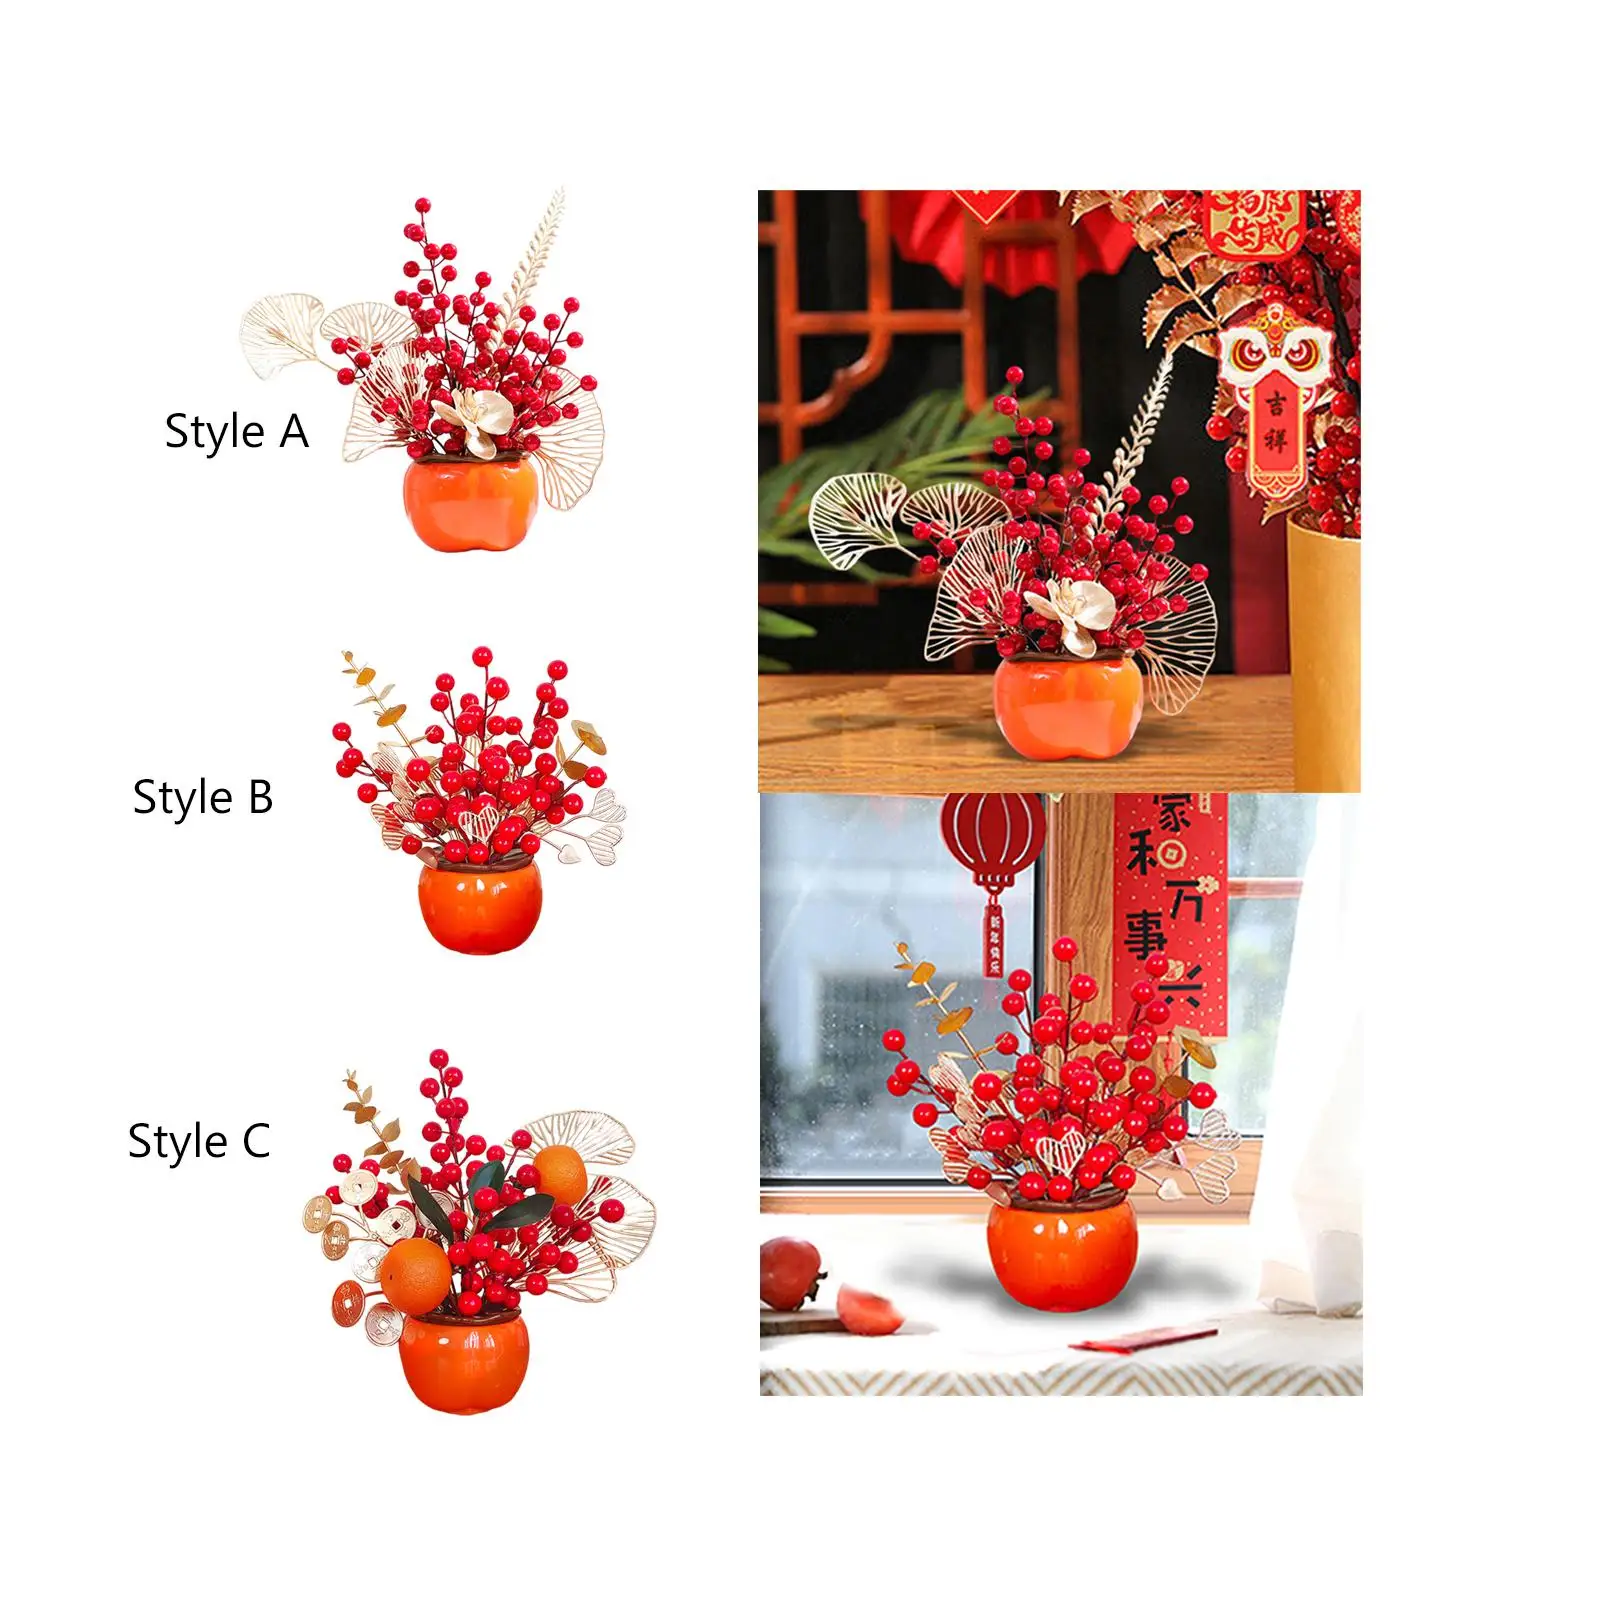 Chinese New Year Decoration Tabletop Creative Decorative Spring Festivals Floral Arrangement for Cabinet Holiday Bedroom Decor